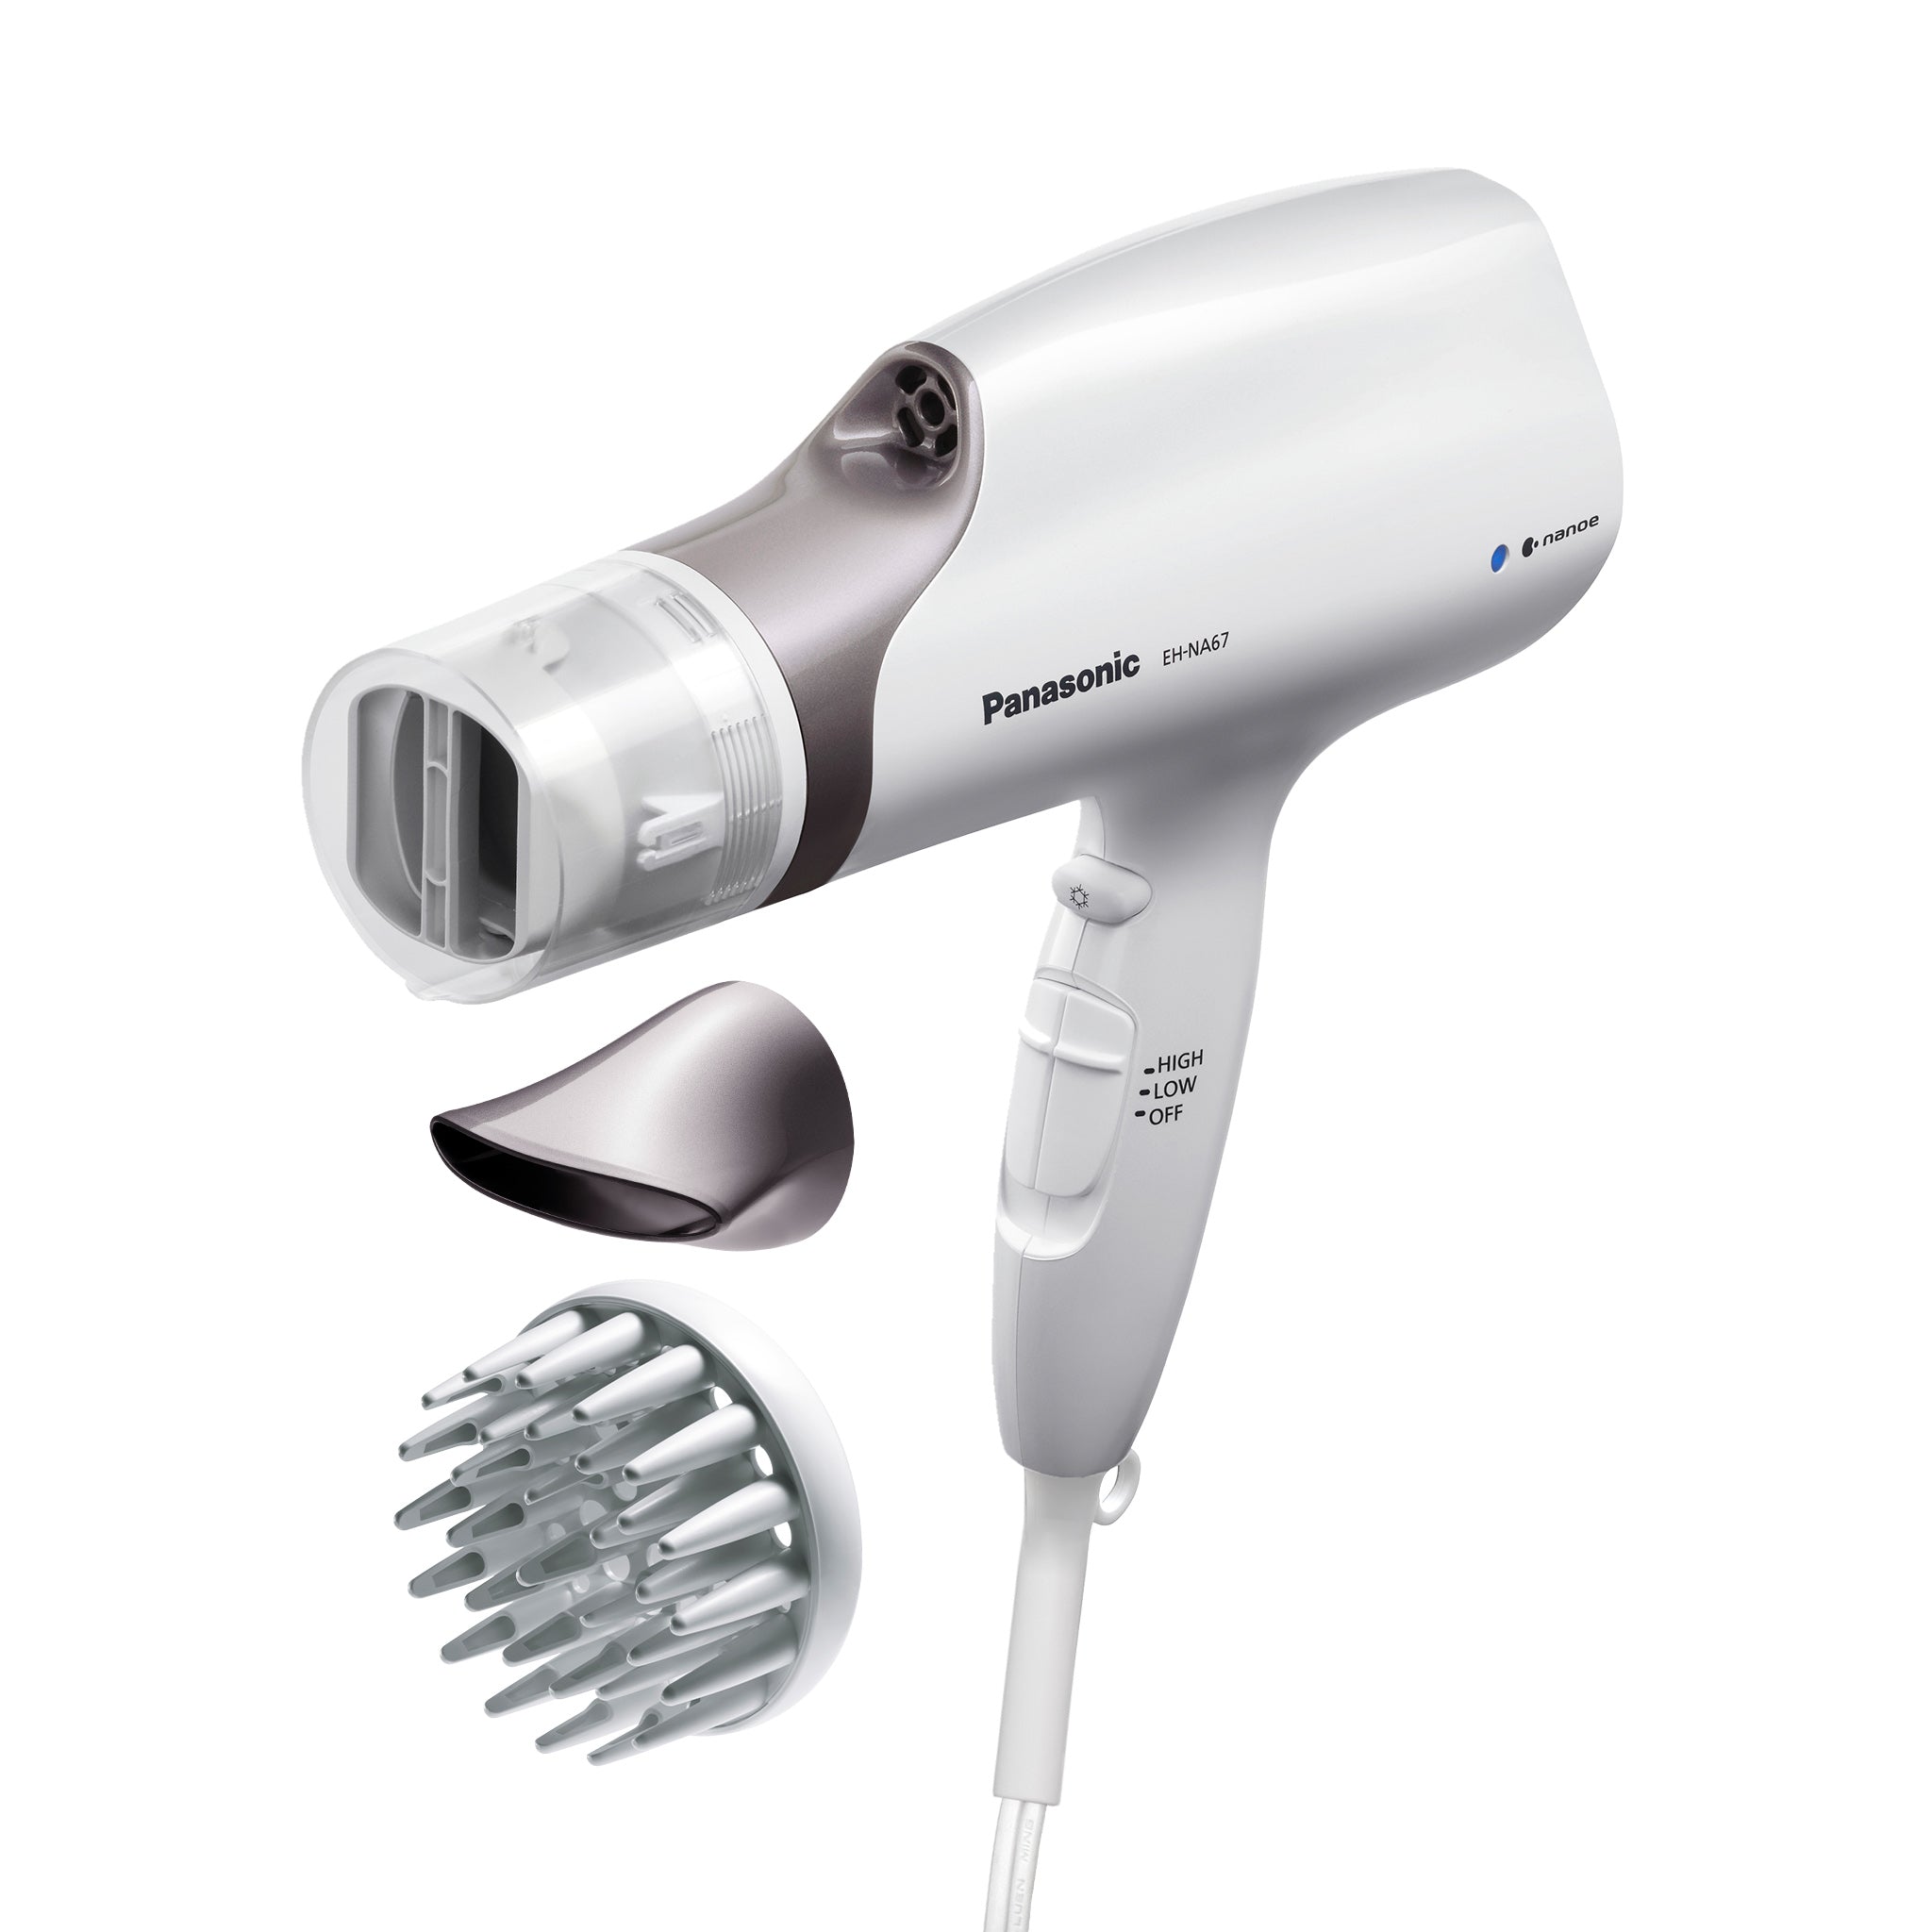 Quick-Dry Hair nanoe™ Nozzle 3 Panasonic Styling including with Attachments Dryer Oscillating